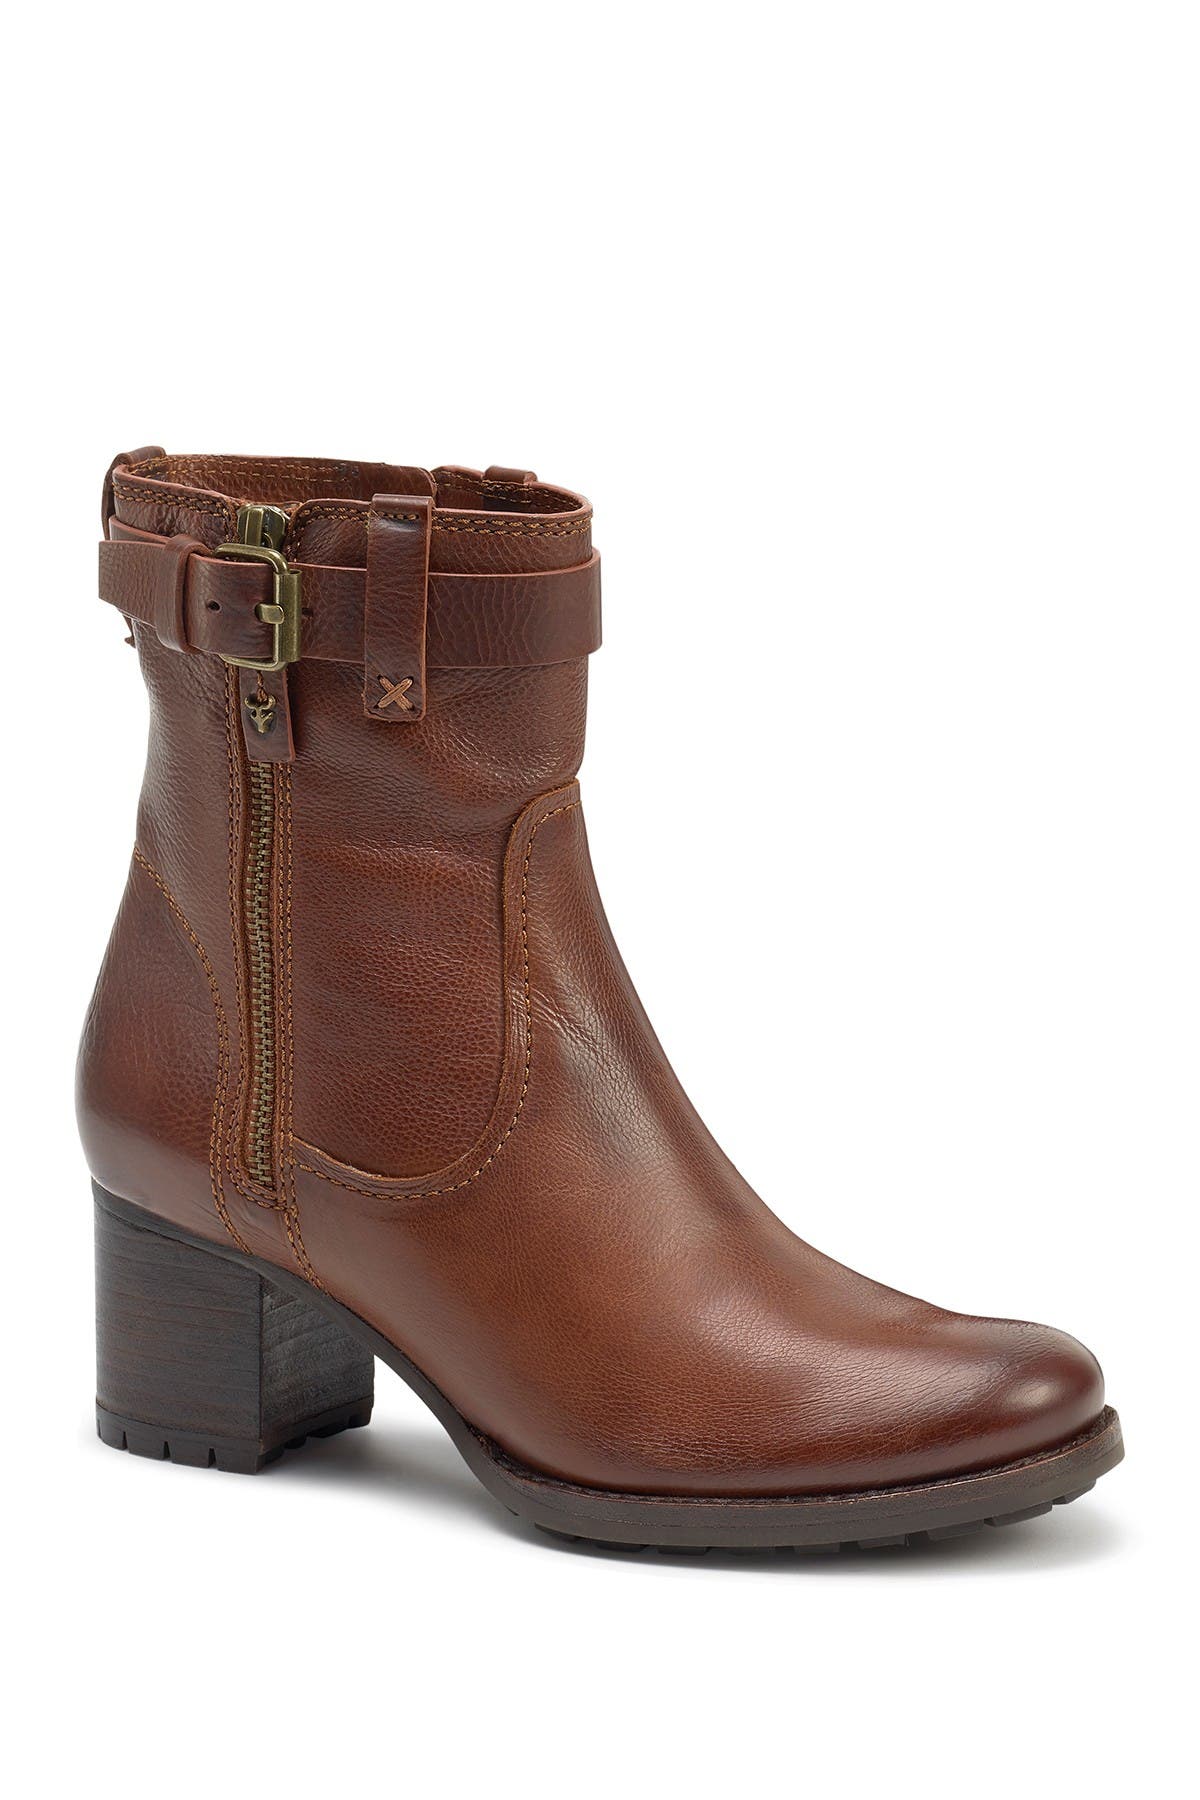 trask madison boot